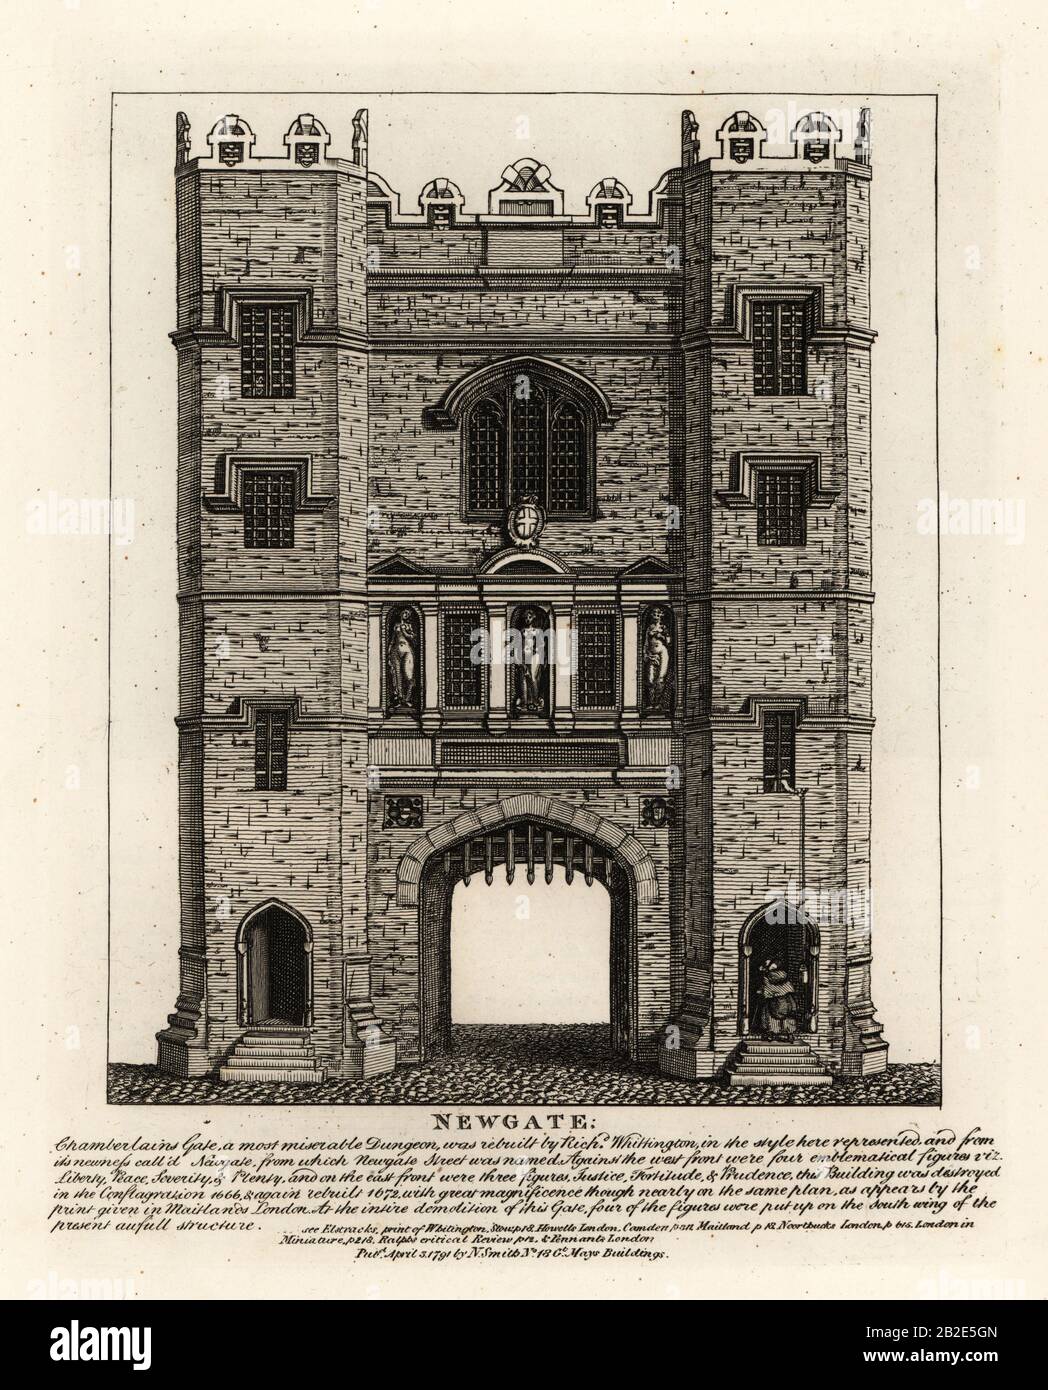 Newgate, rebuilt in 1672 after the Fire of London, with three figures Justice, Fortitude and Prudence from the former gate built by Mayor of London Richard Wittington. Copperplate engraving by John Thomas Smith after original drawings by members of the Society of Antiquaries from his J.T. Smith’s Antiquities of London and its Environs, J. Sewell, R. Folder, J. Simco, London, 1791. Stock Photo